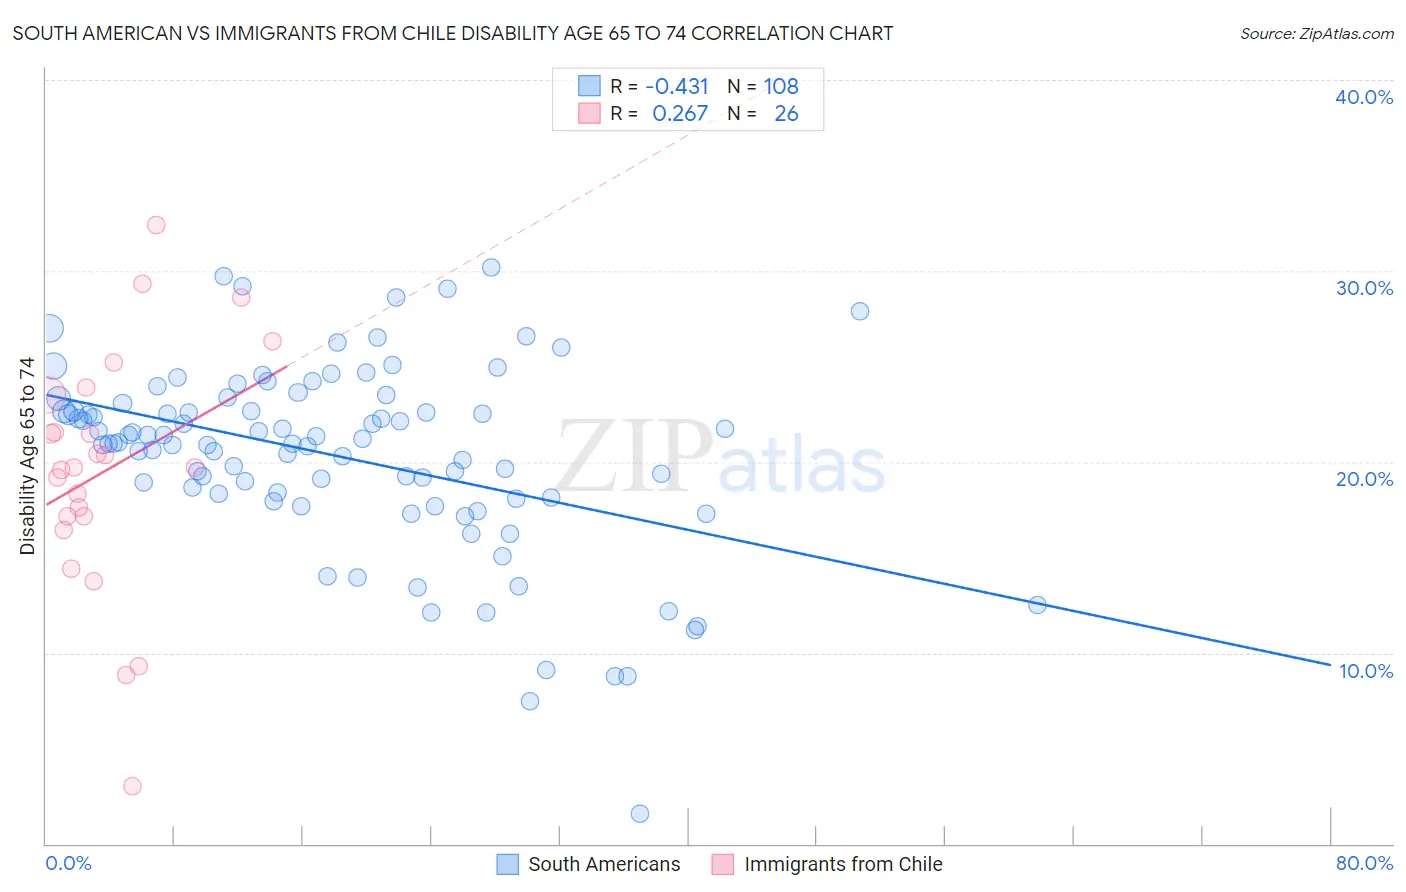 South American vs Immigrants from Chile Disability Age 65 to 74